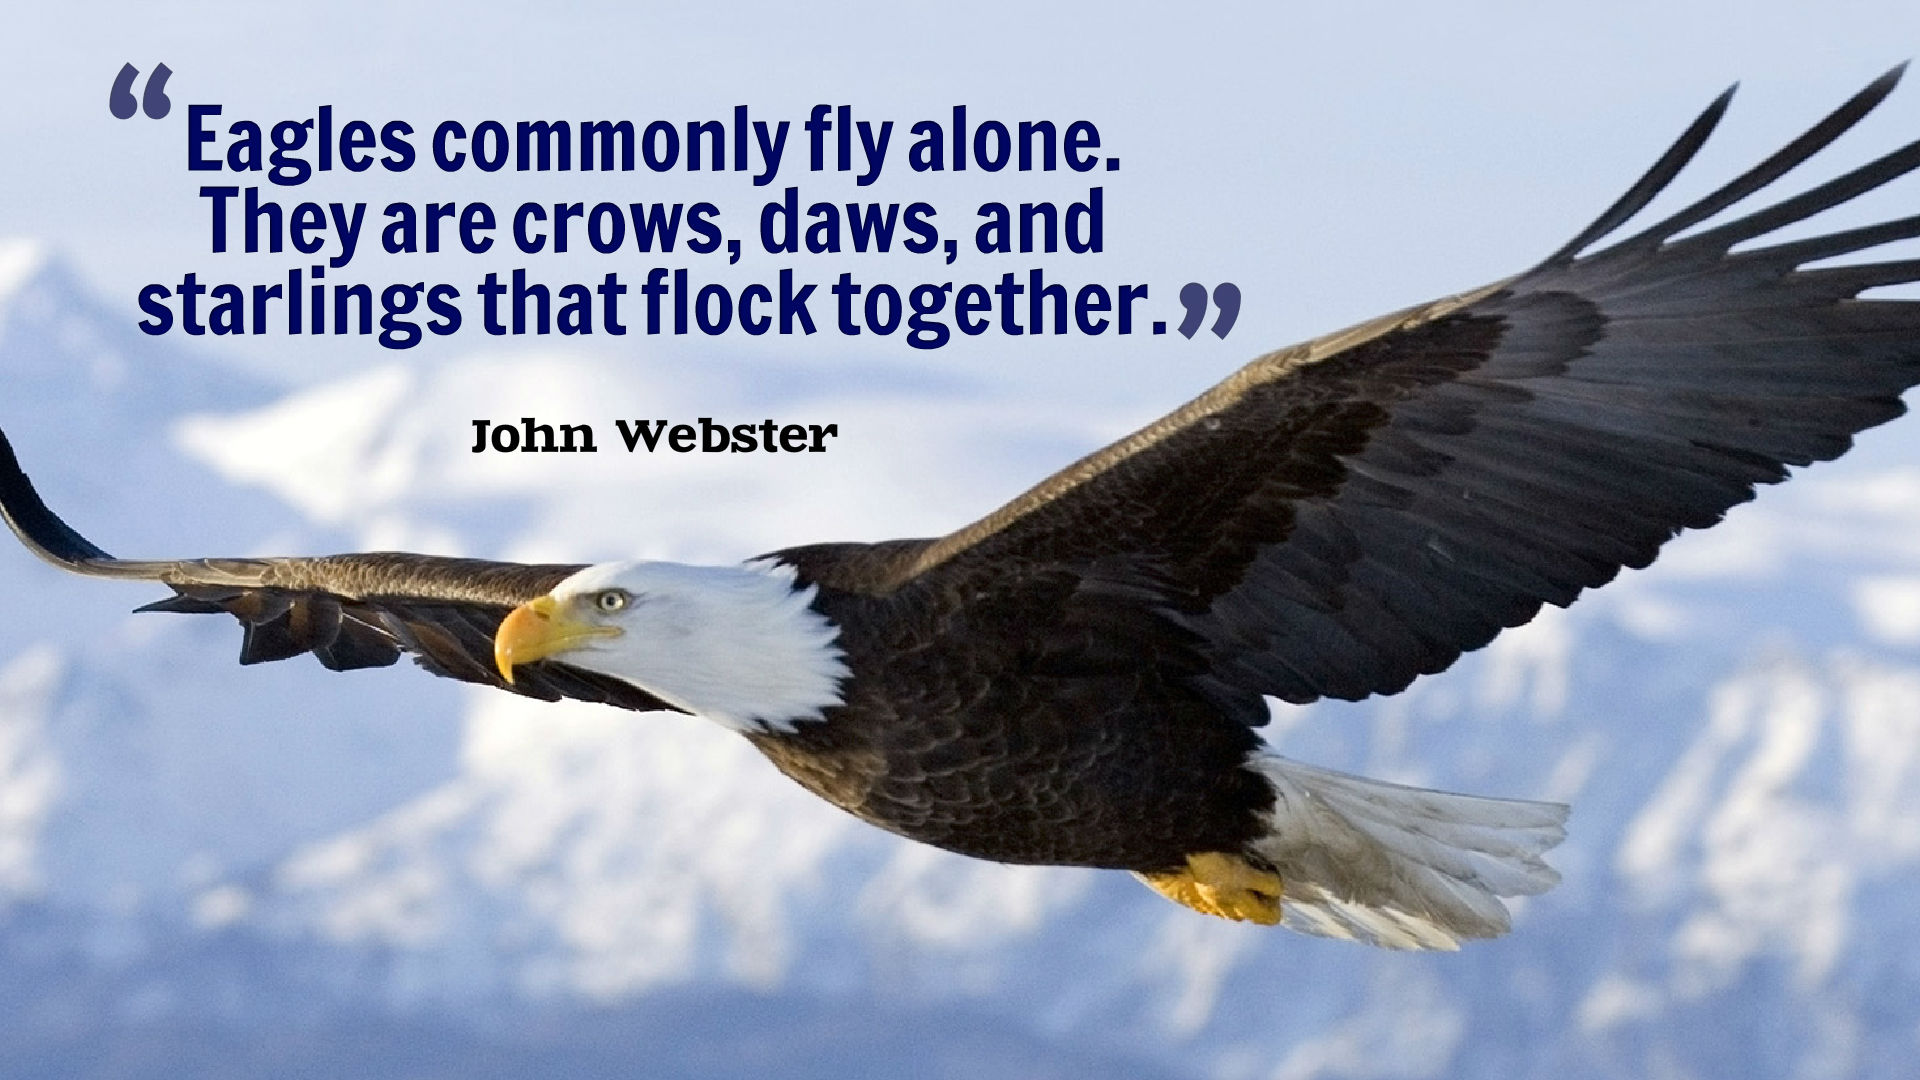 Alone Quotes High Definition Wallpaper - Eagle Fly Alone Quote - HD Wallpaper 